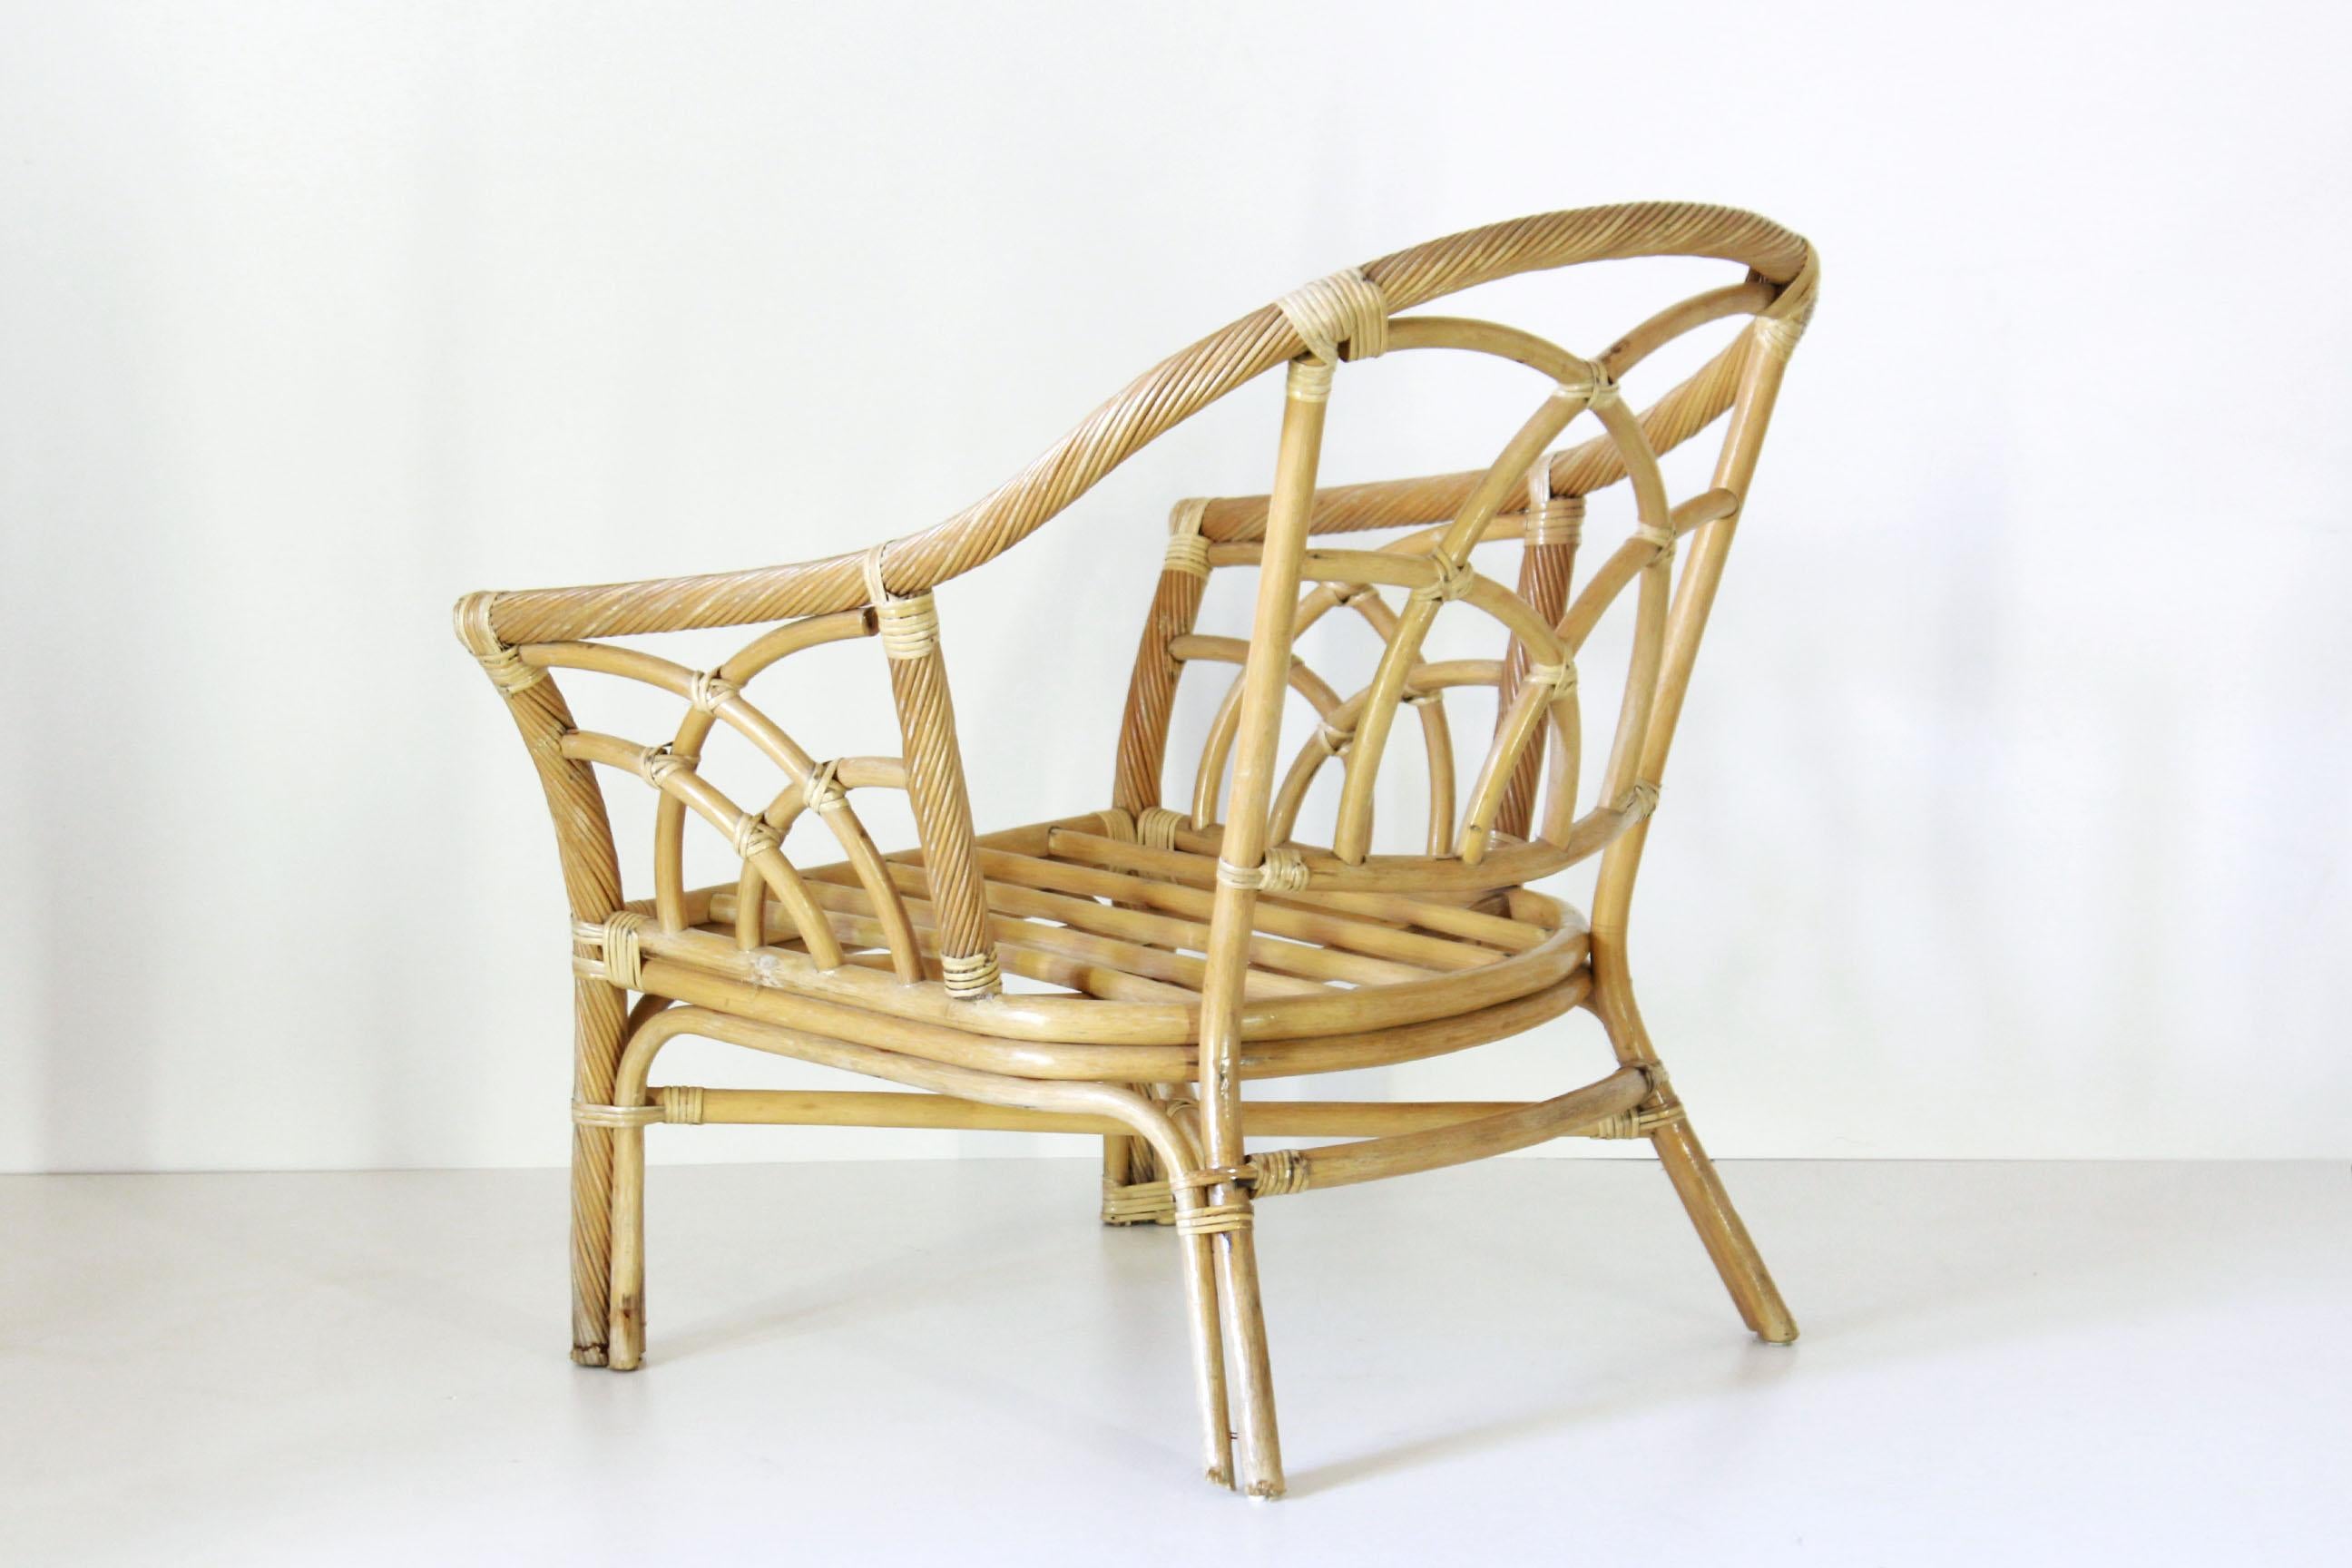 1980s Bamboo Vintage Garden Armchair In Good Condition For Sale In Ceglie Messapica, IT